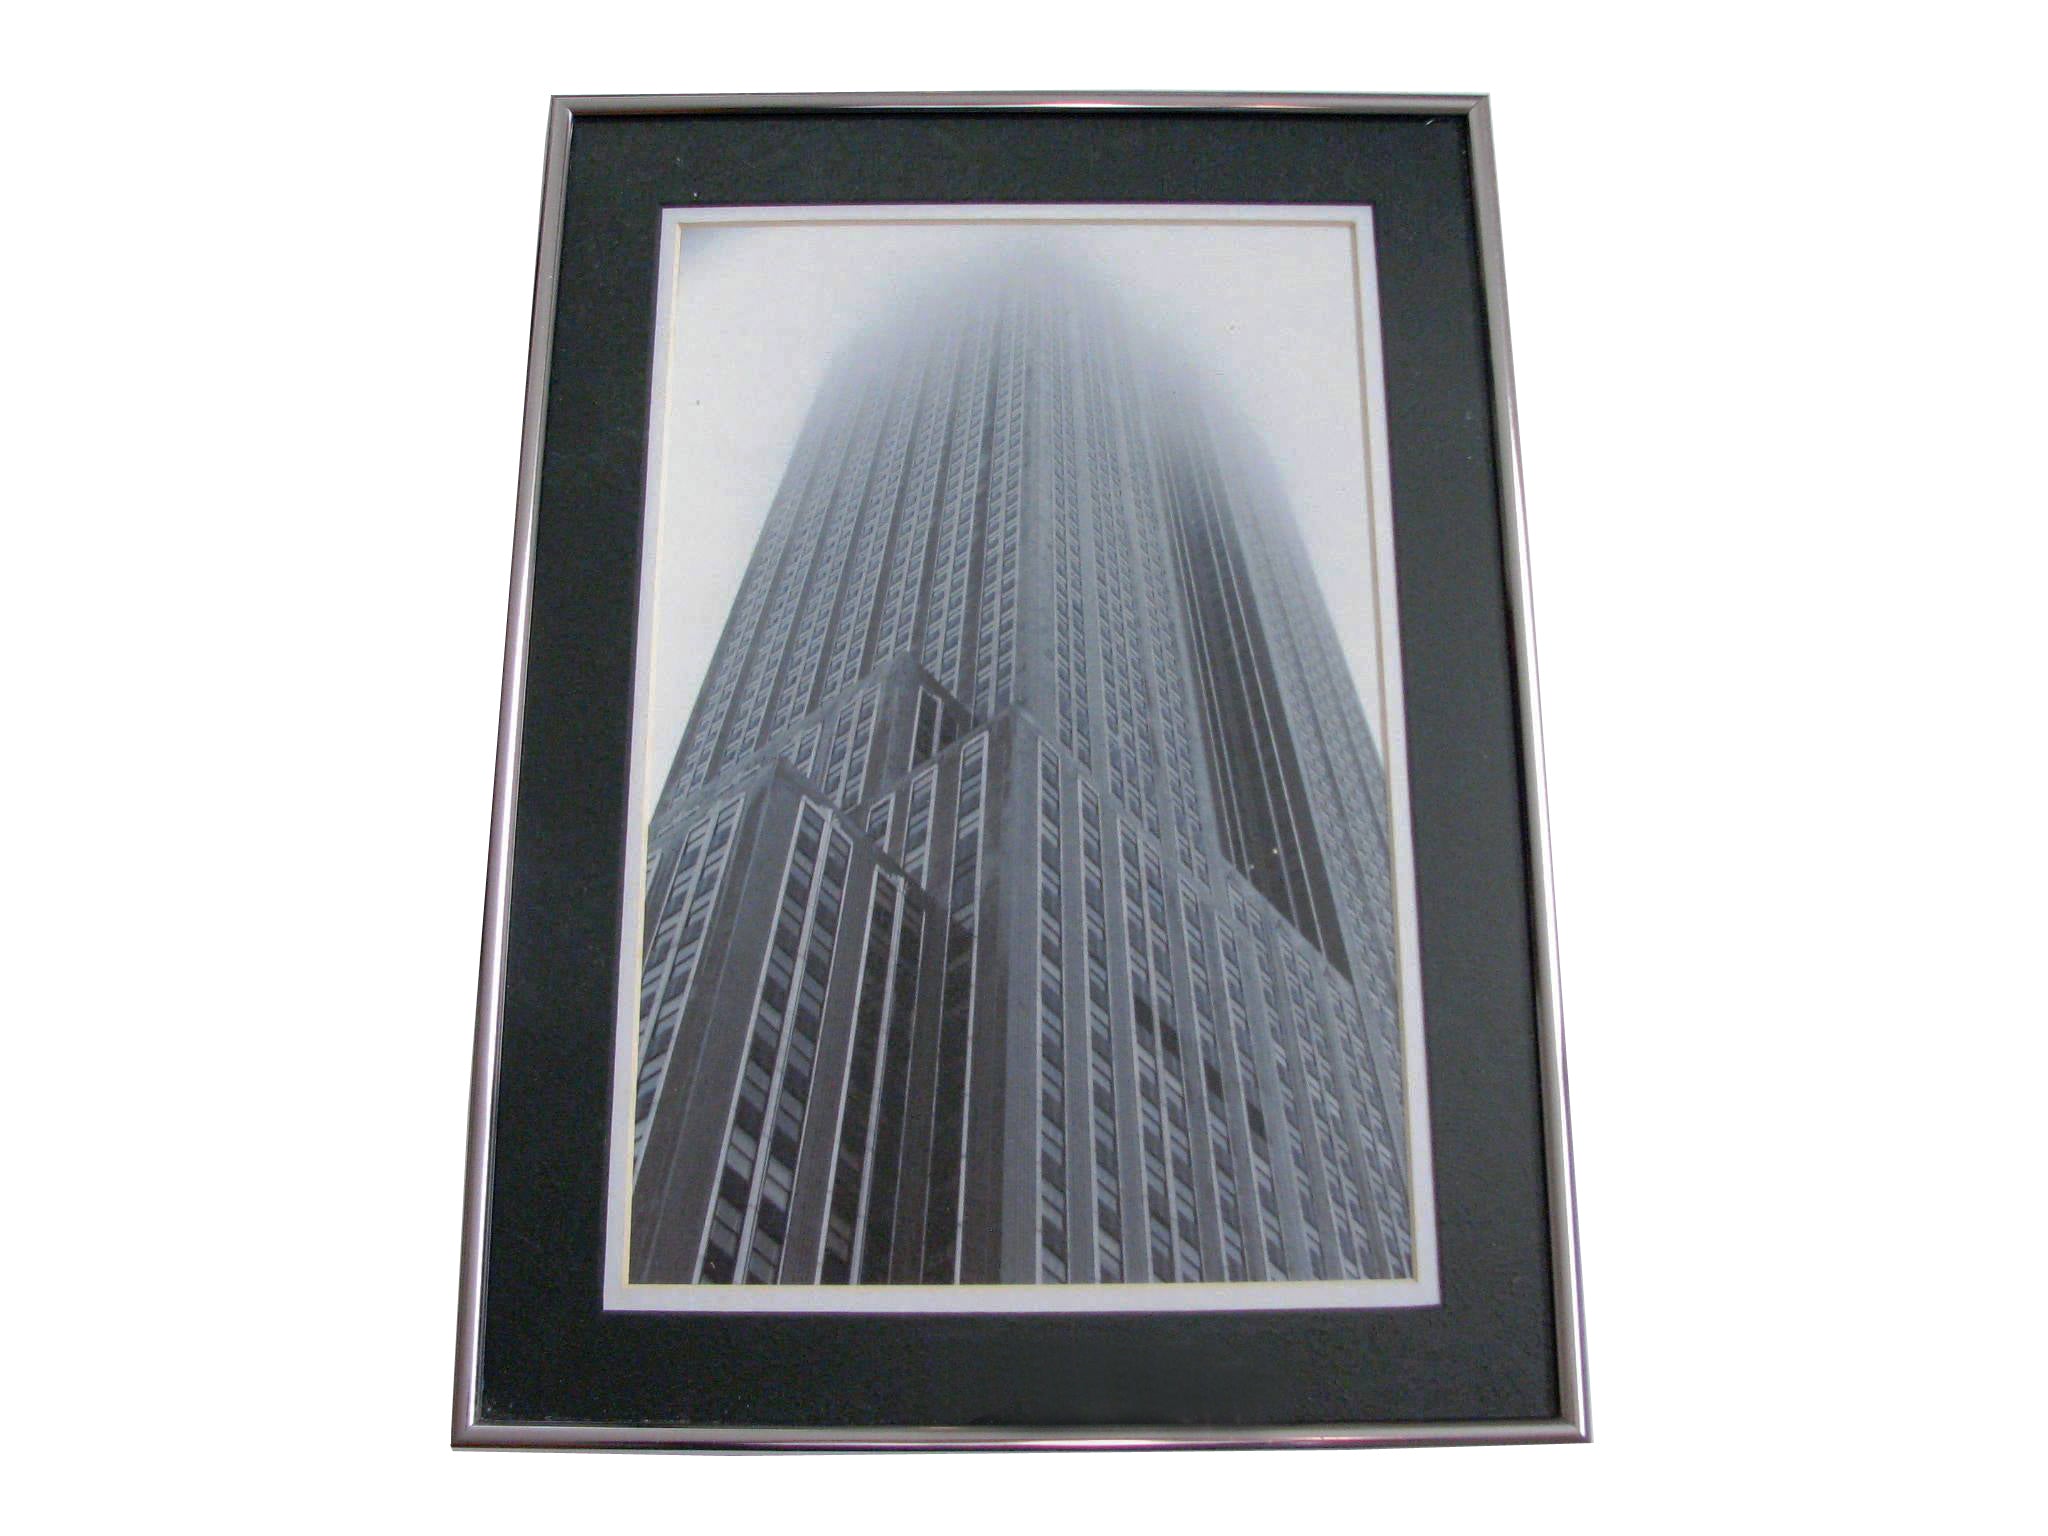 edgebrookhouse - Vintage Photograph Looking Up at the Iconic Chicago Sears / Willis Tower